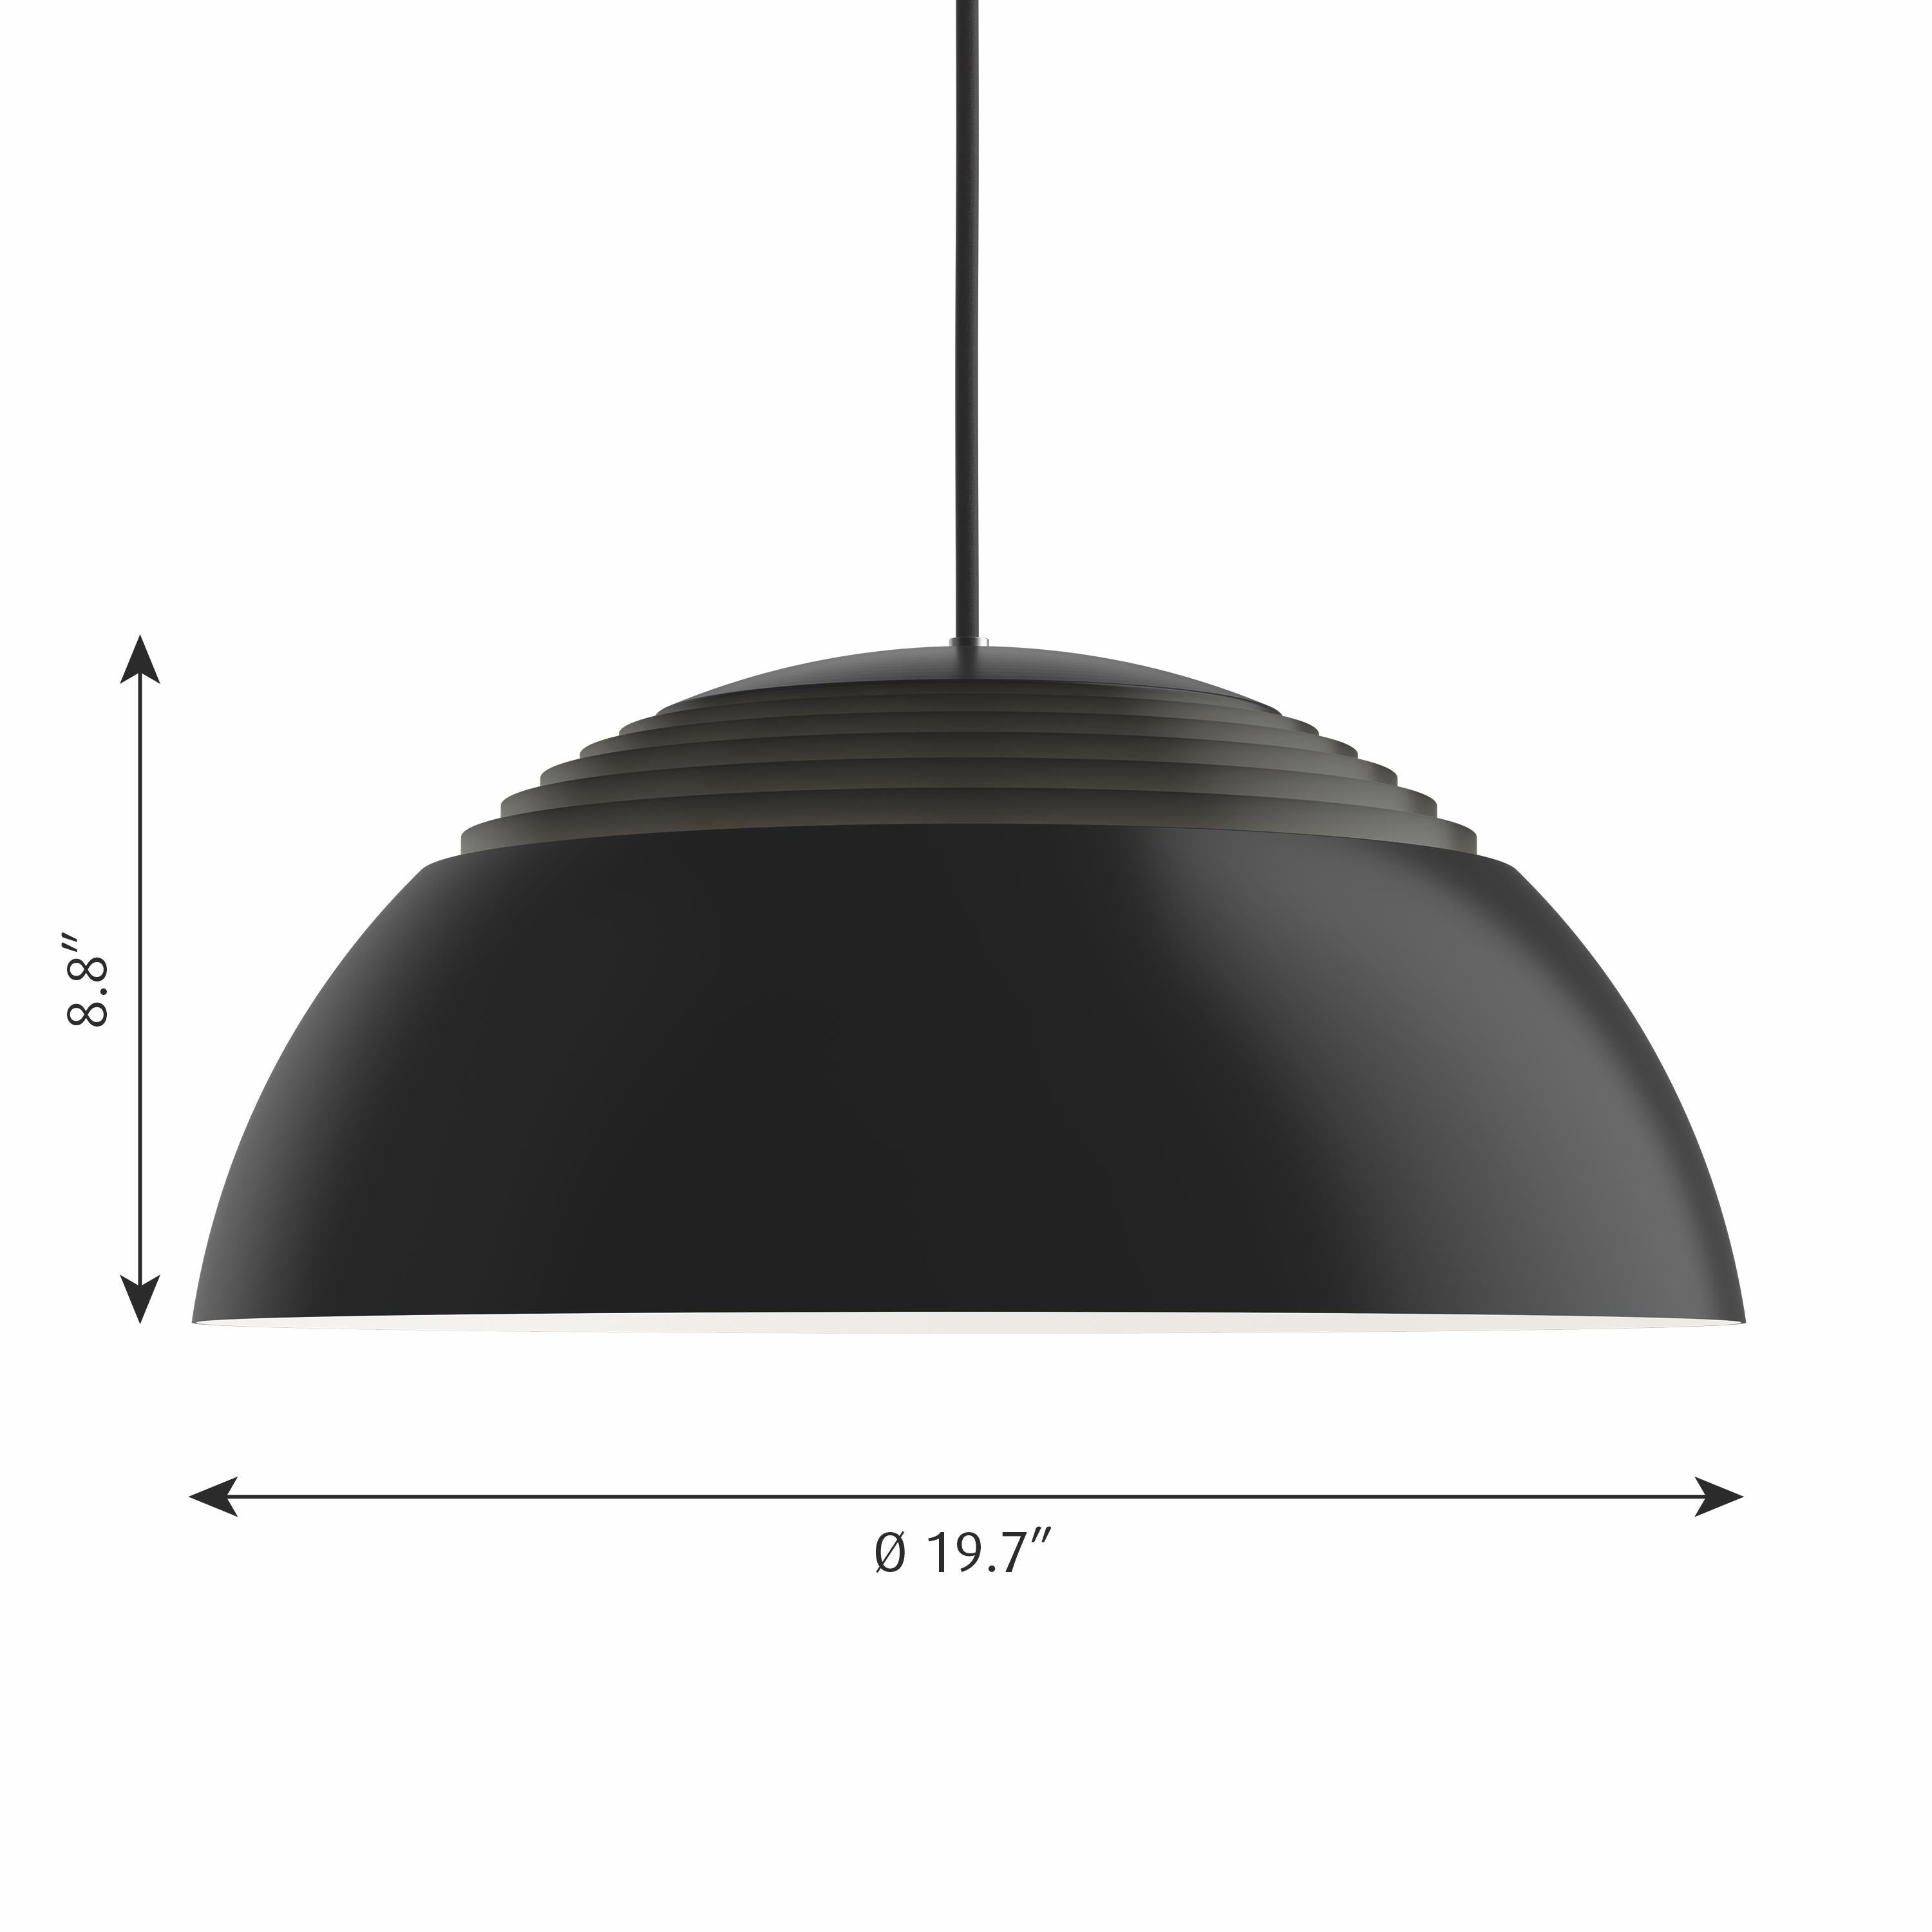 Large AJ Royal pendant in black by Arne Jacobsen for Louis Poulsen. Designed in 1960 by Arne Jacobsen for the SAS Royal Hotel in Copenhagen, the AJ Royal is an icon that follows Jacobsen's overall geometric shape concept. The spherical dome shape is